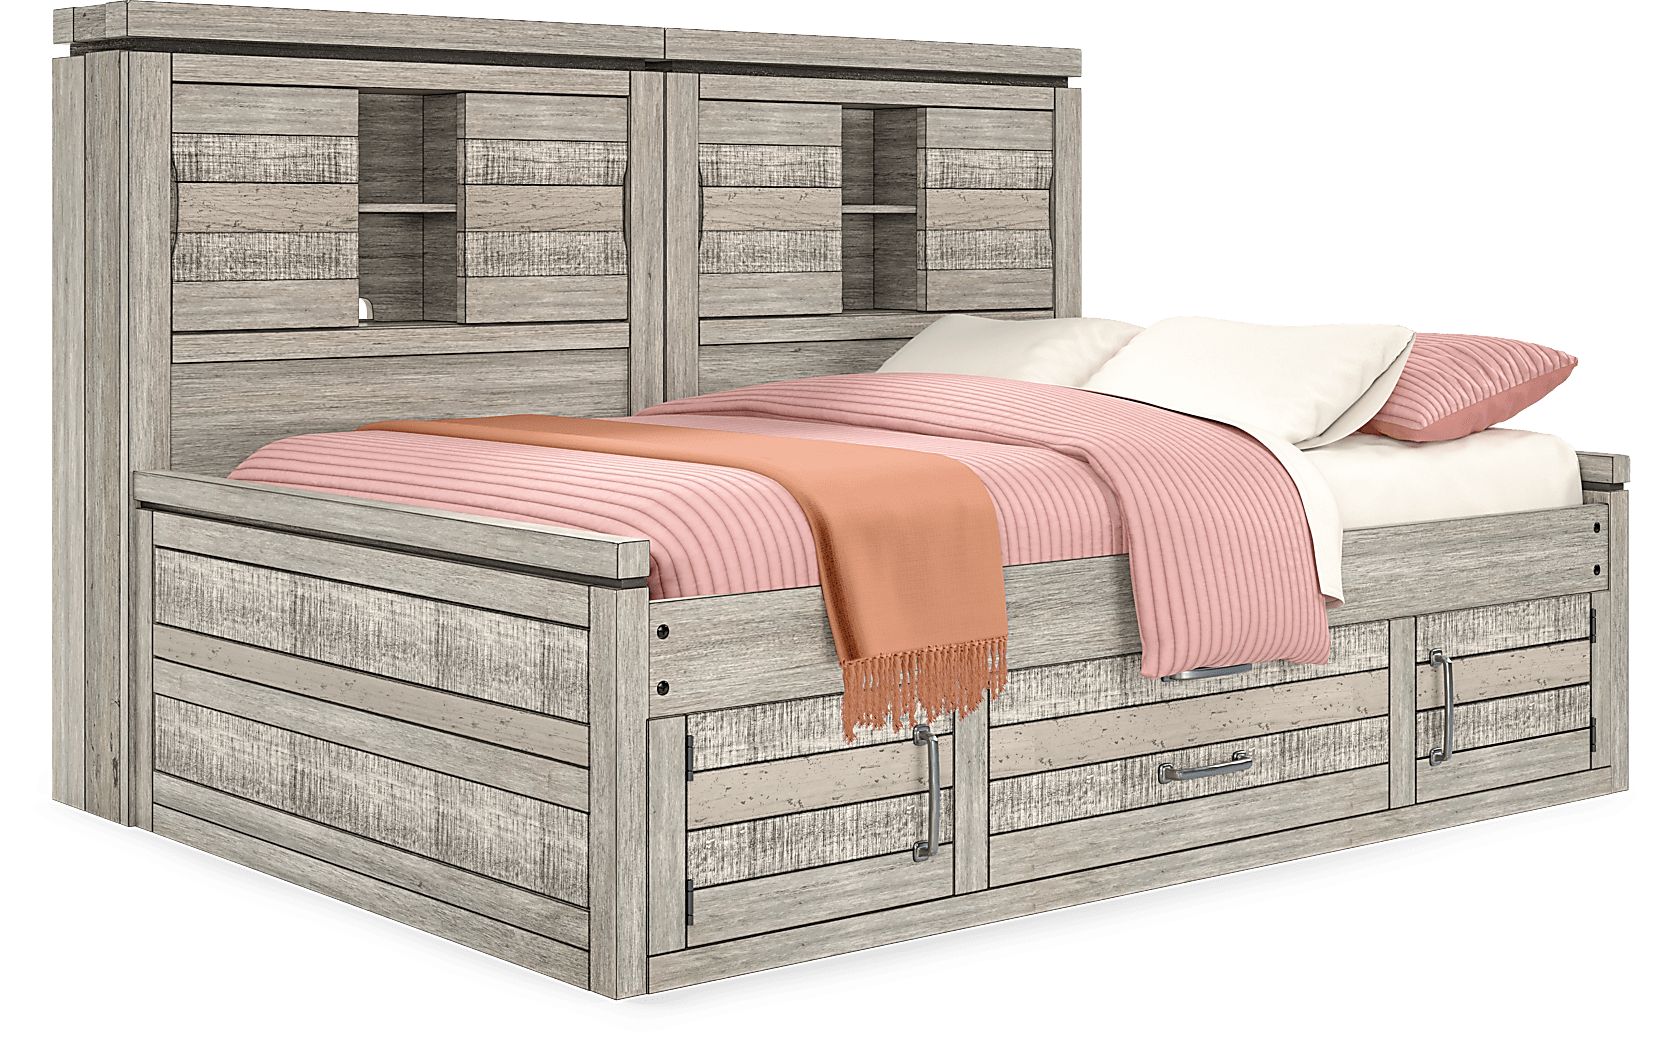 Rooms To Go Kids Westover Hills Jr. Reclaimed Gray 3 Pc Full Bookcase Wall Bed with Storage